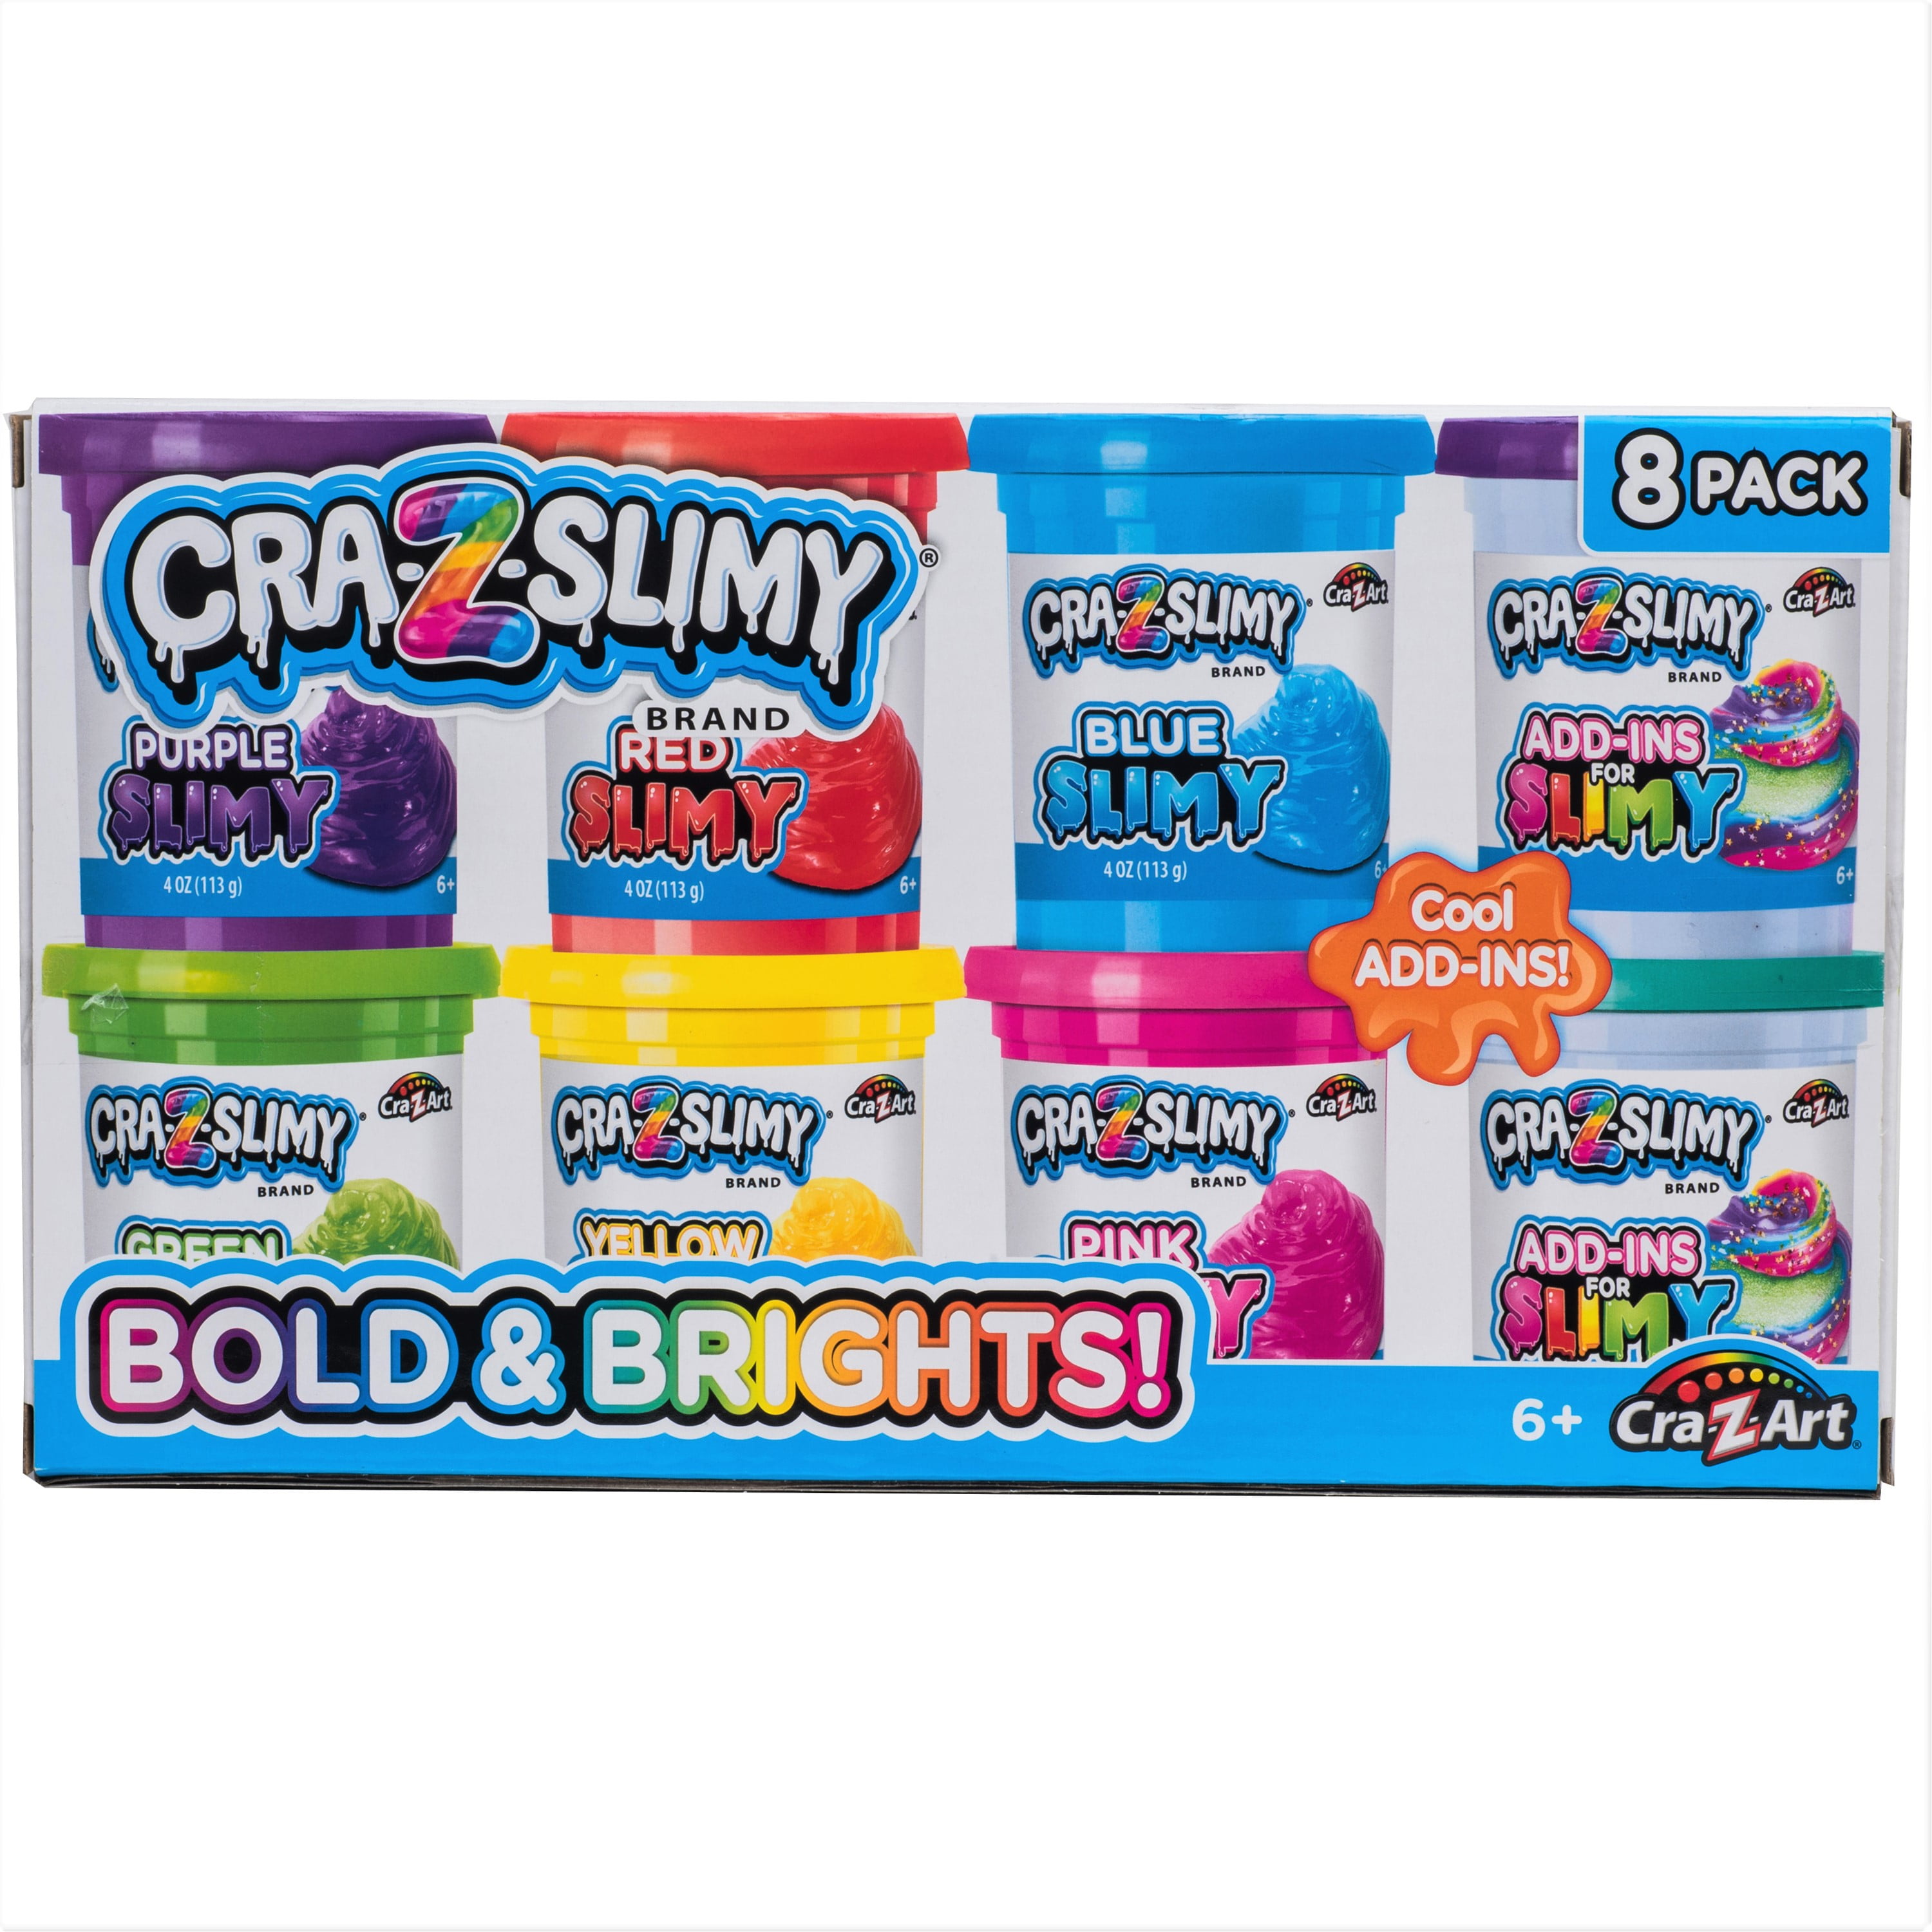 Slime Coloring and Activity Book [Book]